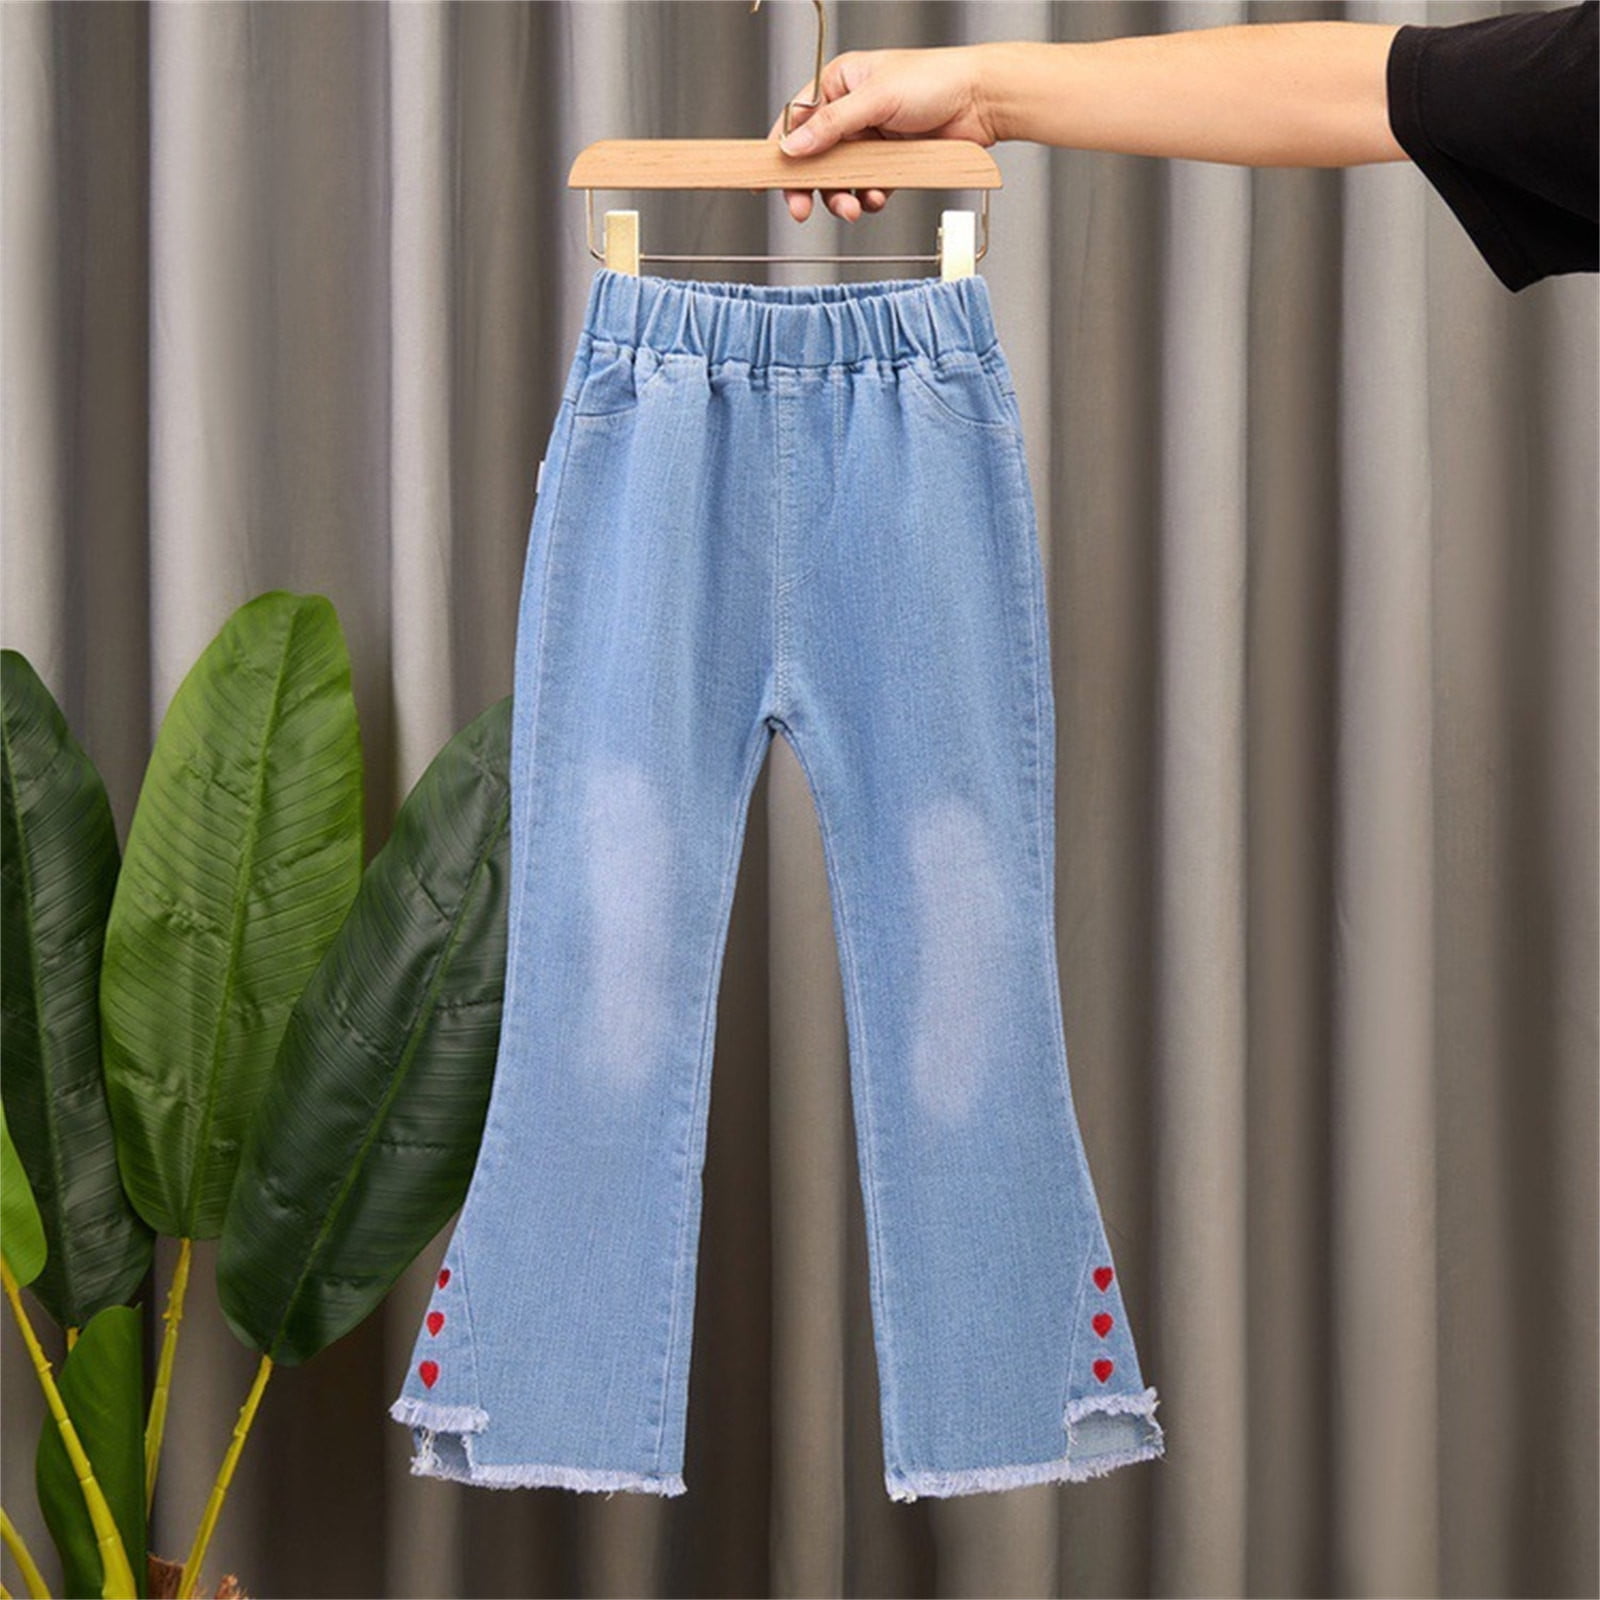 Wide Girls,Toddler Girls,Flare Flared Jeans Baggy Delas!2-13 Bootcut Jeans,Girls Leg Baby Flare Jeans,Girls Jeans Years Girls,Toddler Flare Pants,Bootcut Jeans Jeans Girls for